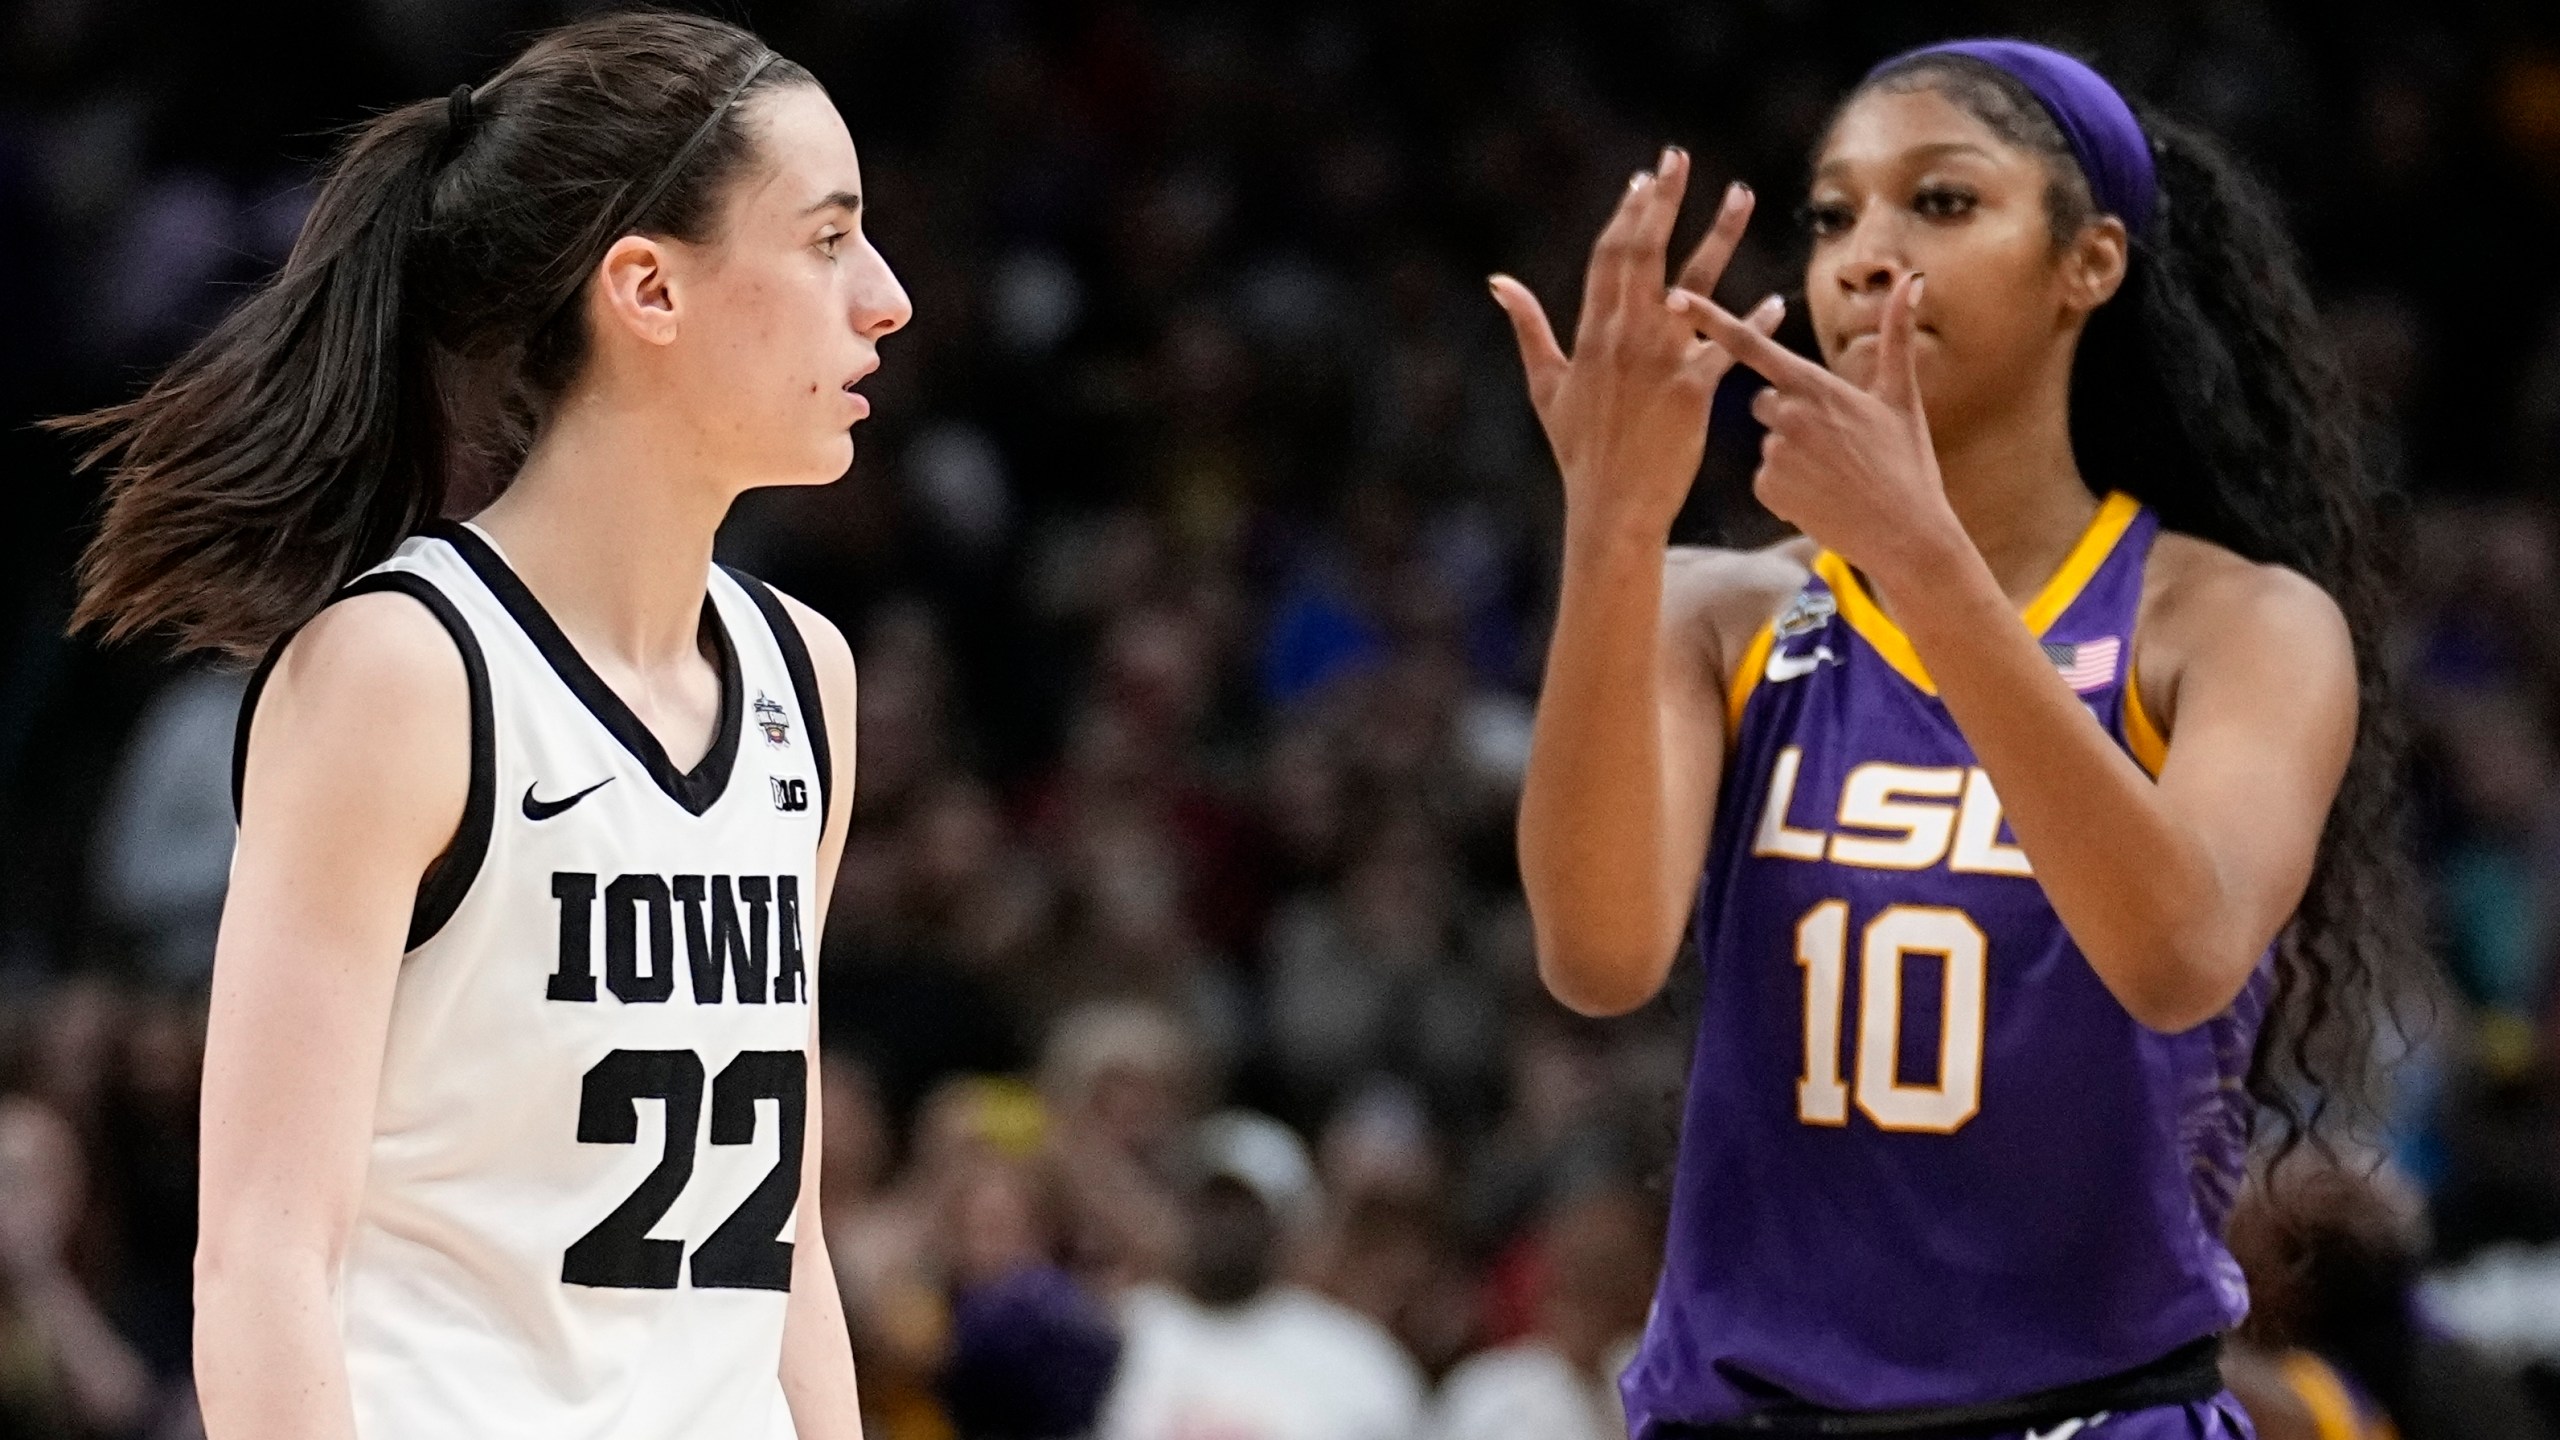 FILE -LSU's Angel Reese reacts in front of Iowa's Caitlin Clark during the second half of the NCAA Women's Final Four championship basketball game April 2, 2023, in Dallas. Iowa and LSU are getting ready to meet again in a rematch of the 2023 national championship game on Monday, April 1, 2024. (AP Photo/Tony Gutierrez, File)